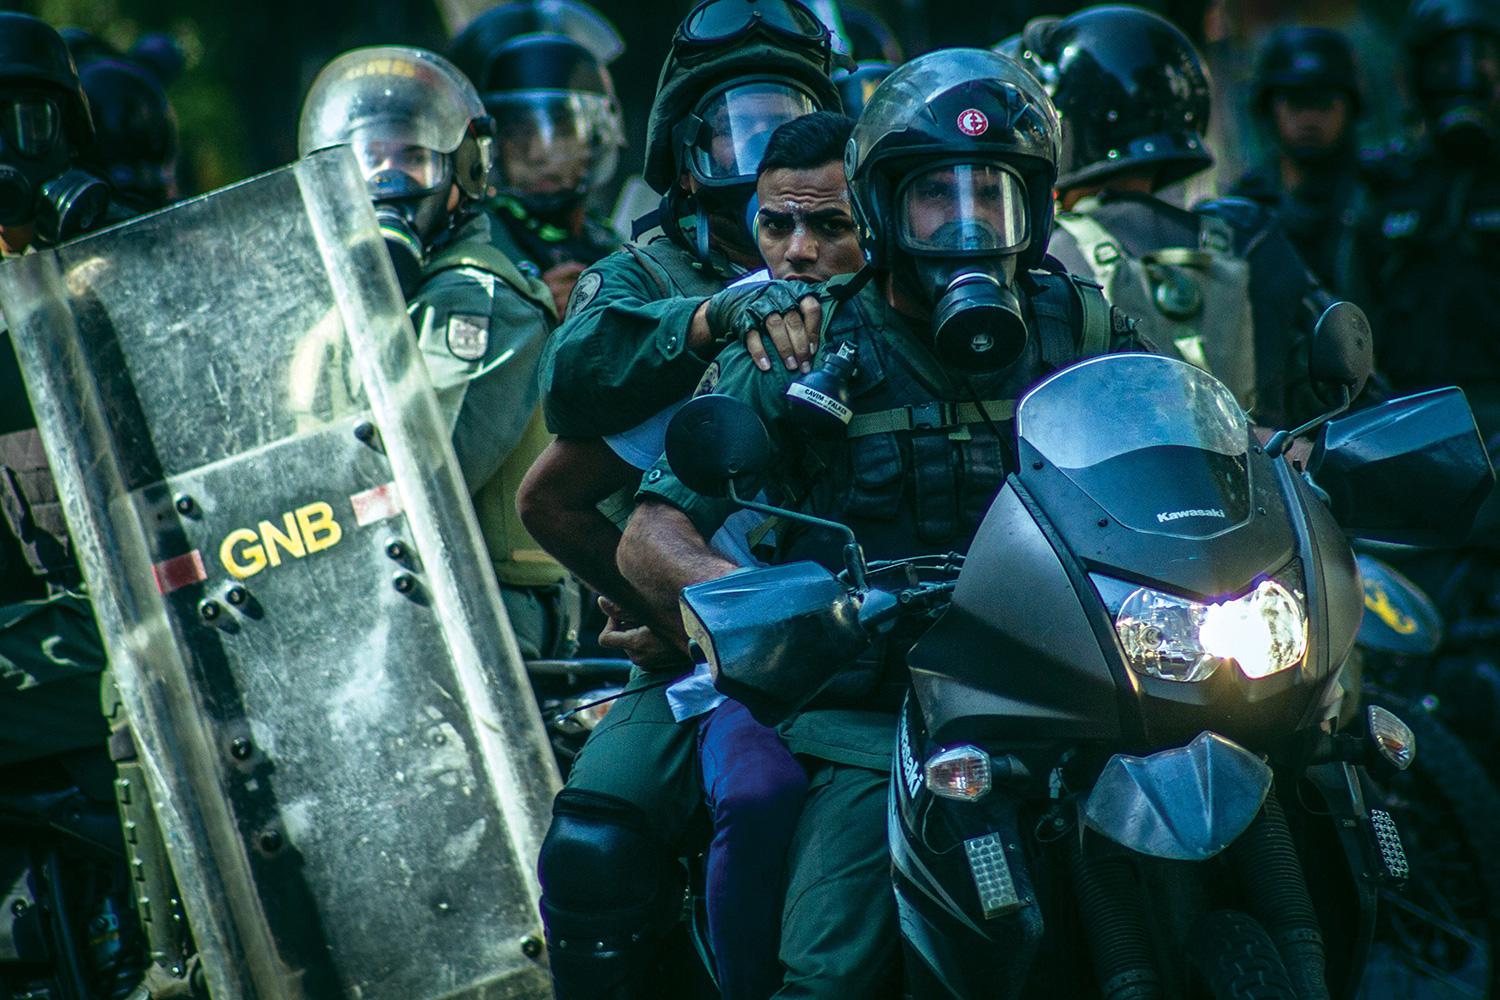 Members of the National Bolivarian Police detain a demonstrator at anti-government protests in Caracas, Venezuela, March 22, 2014.